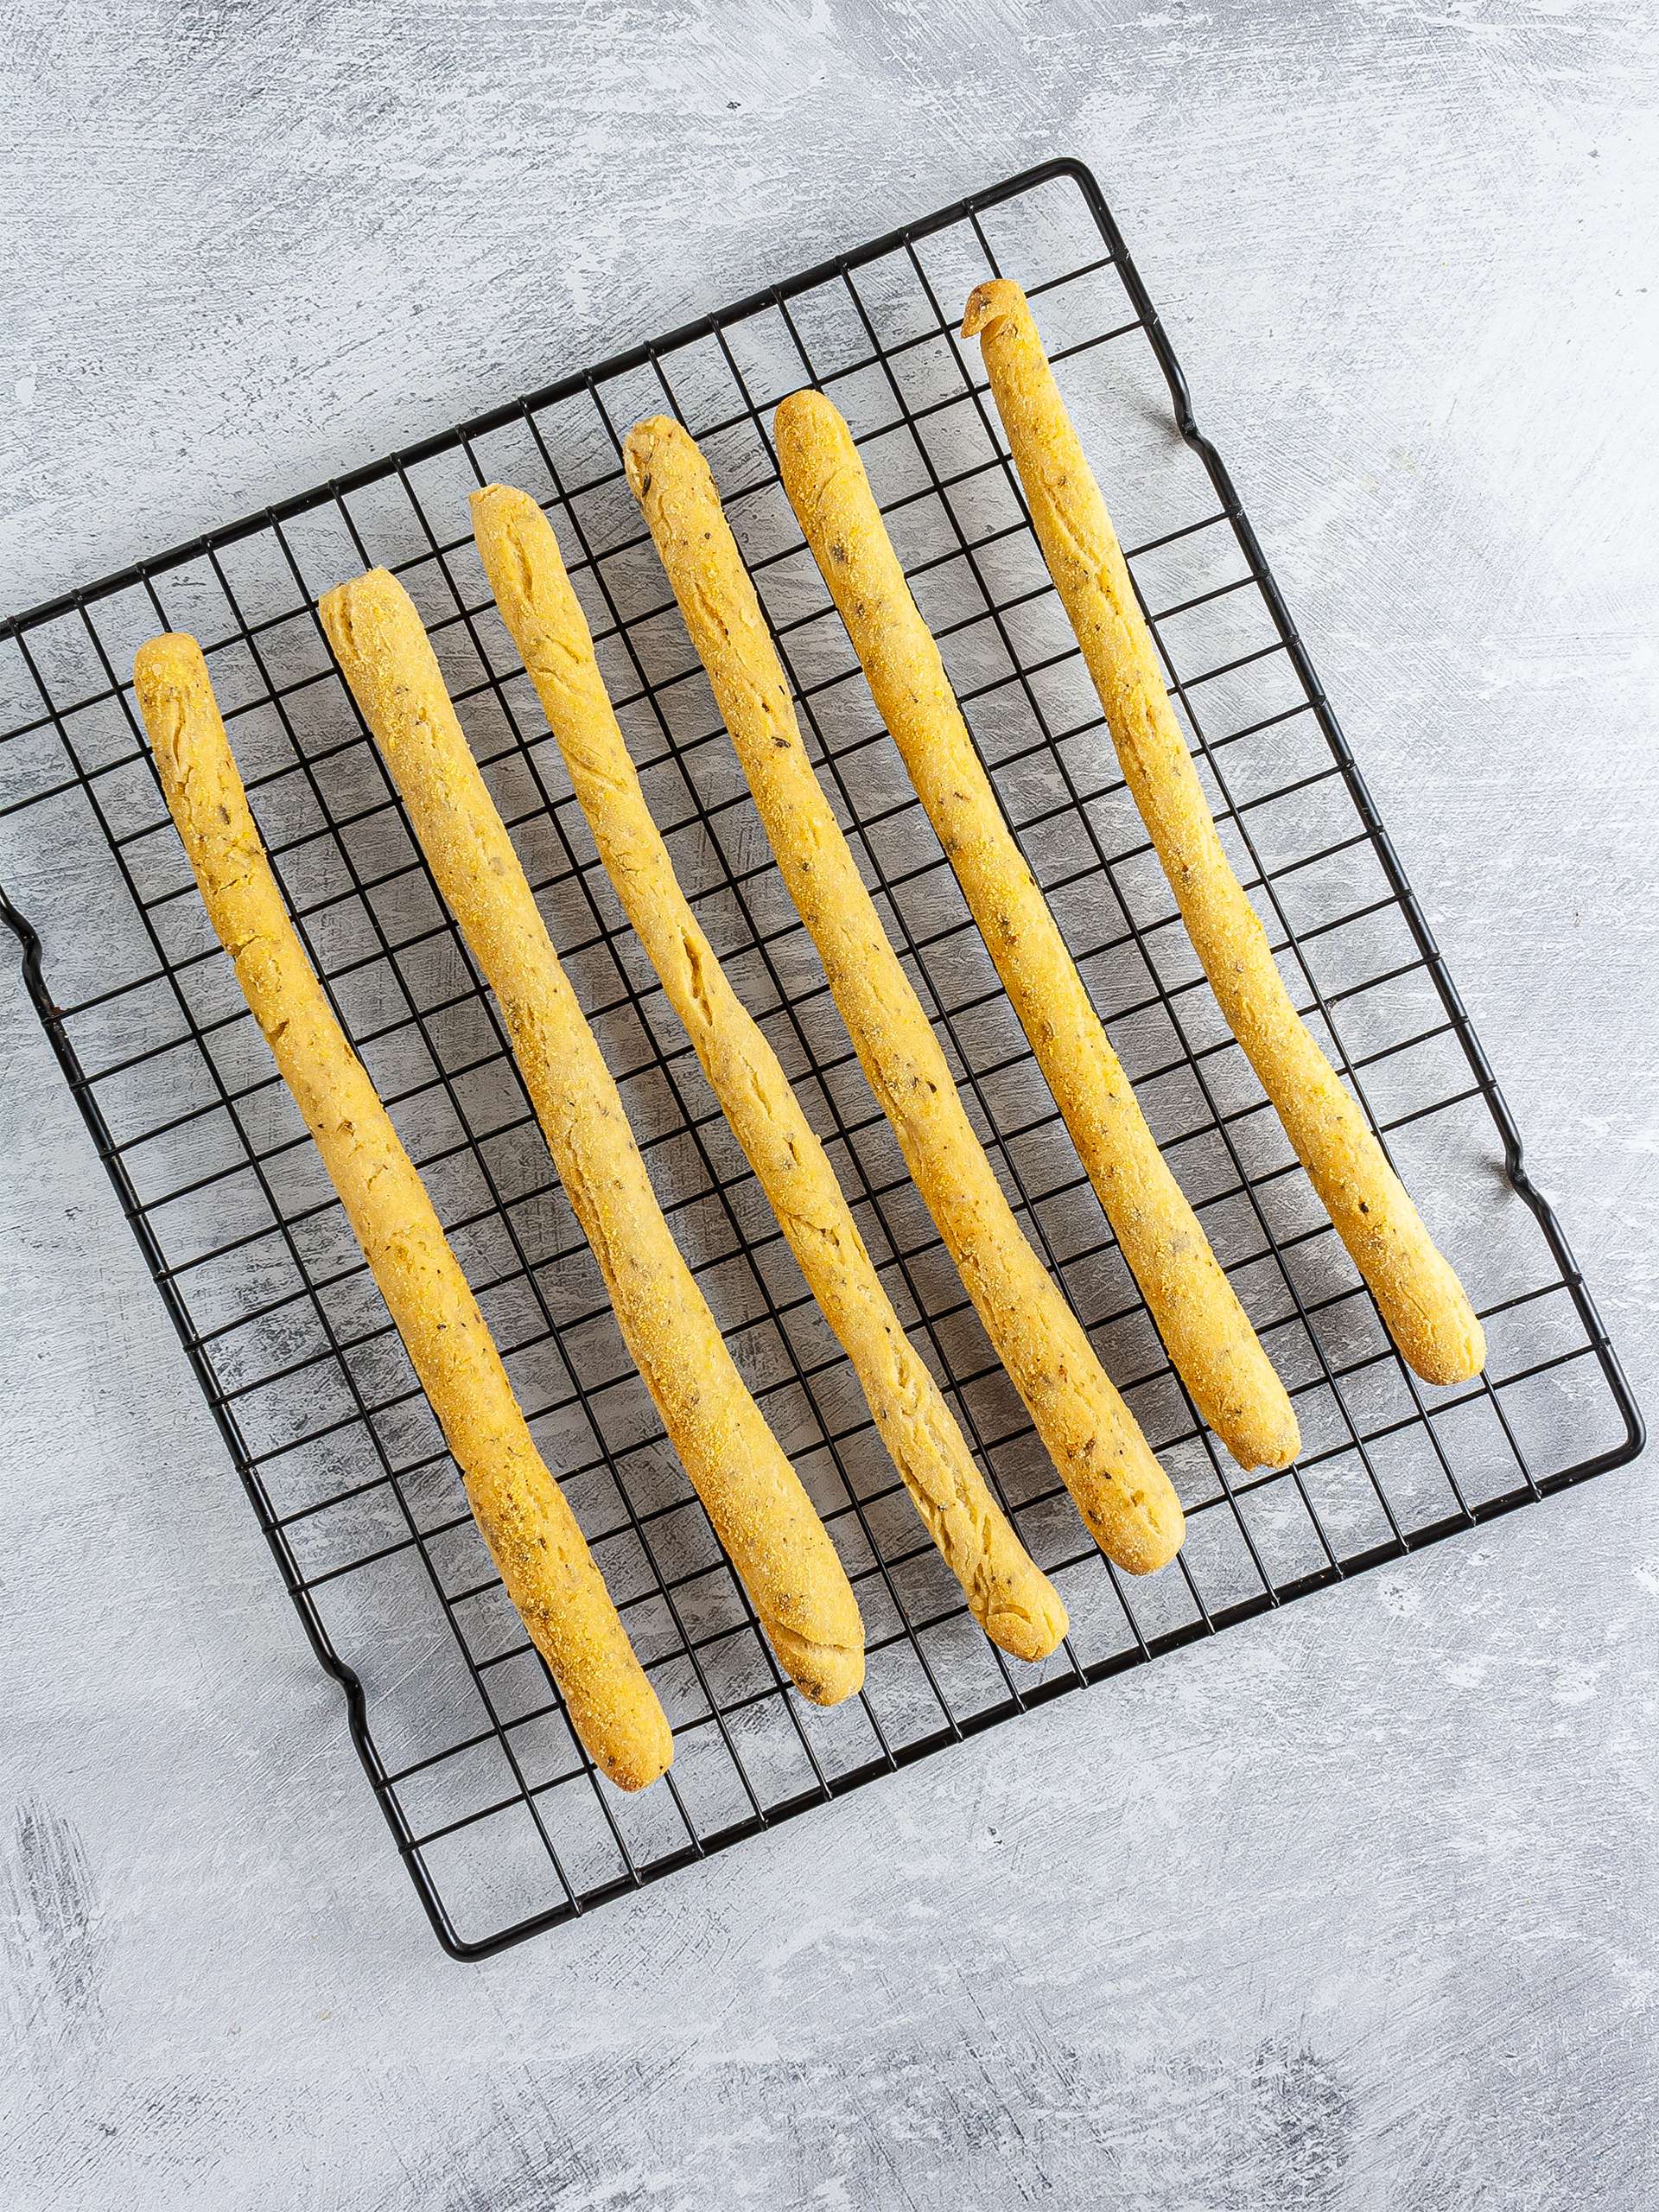 Baked breadsticks on a wire rack